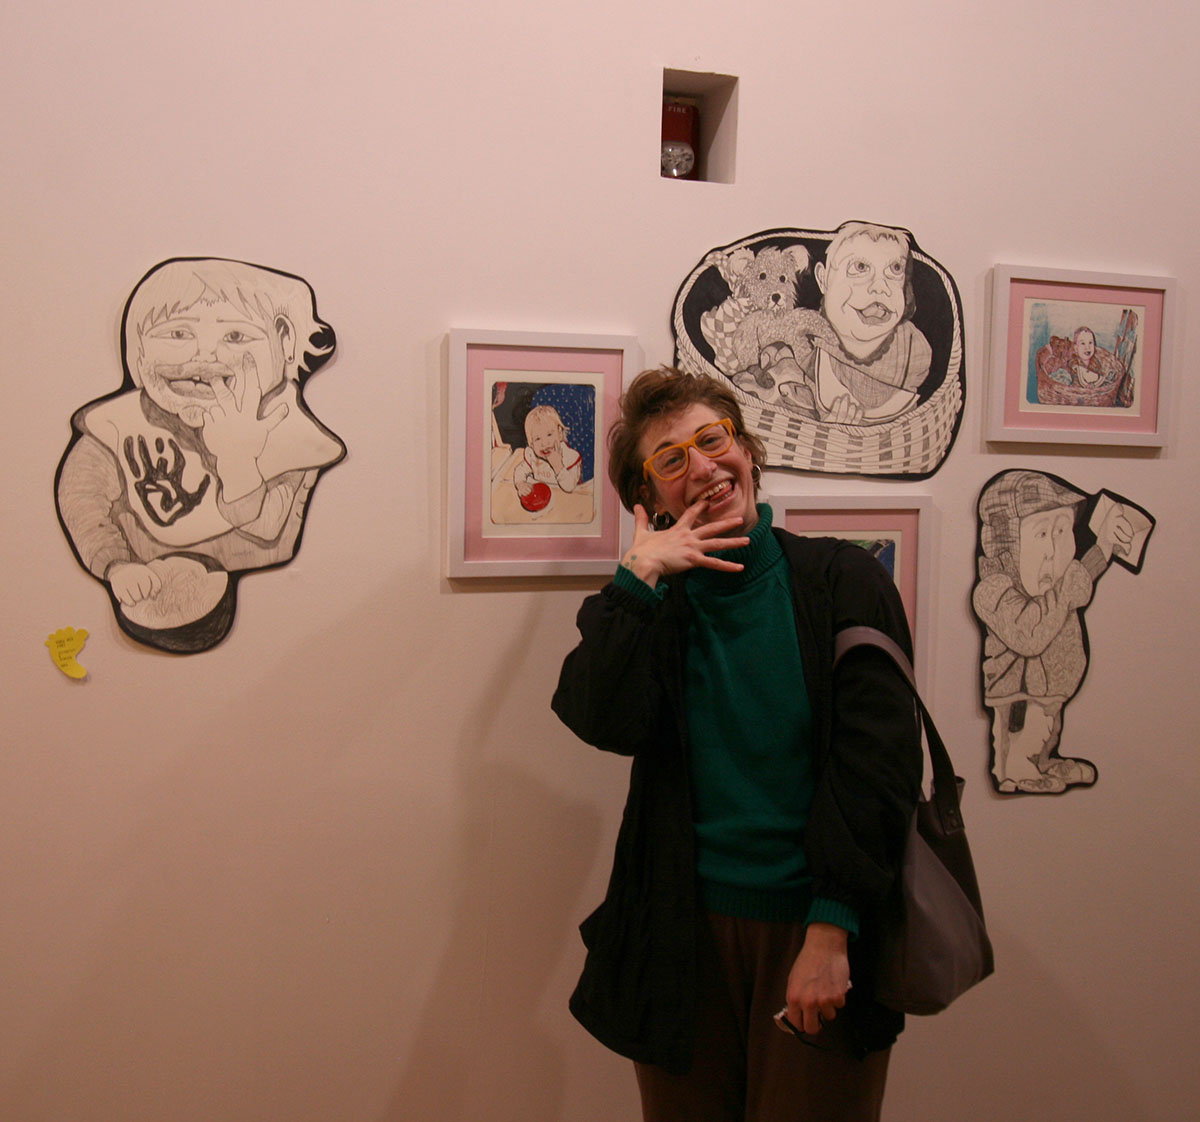 A patron posing for a photo in front of the "Baby Show" artowrks